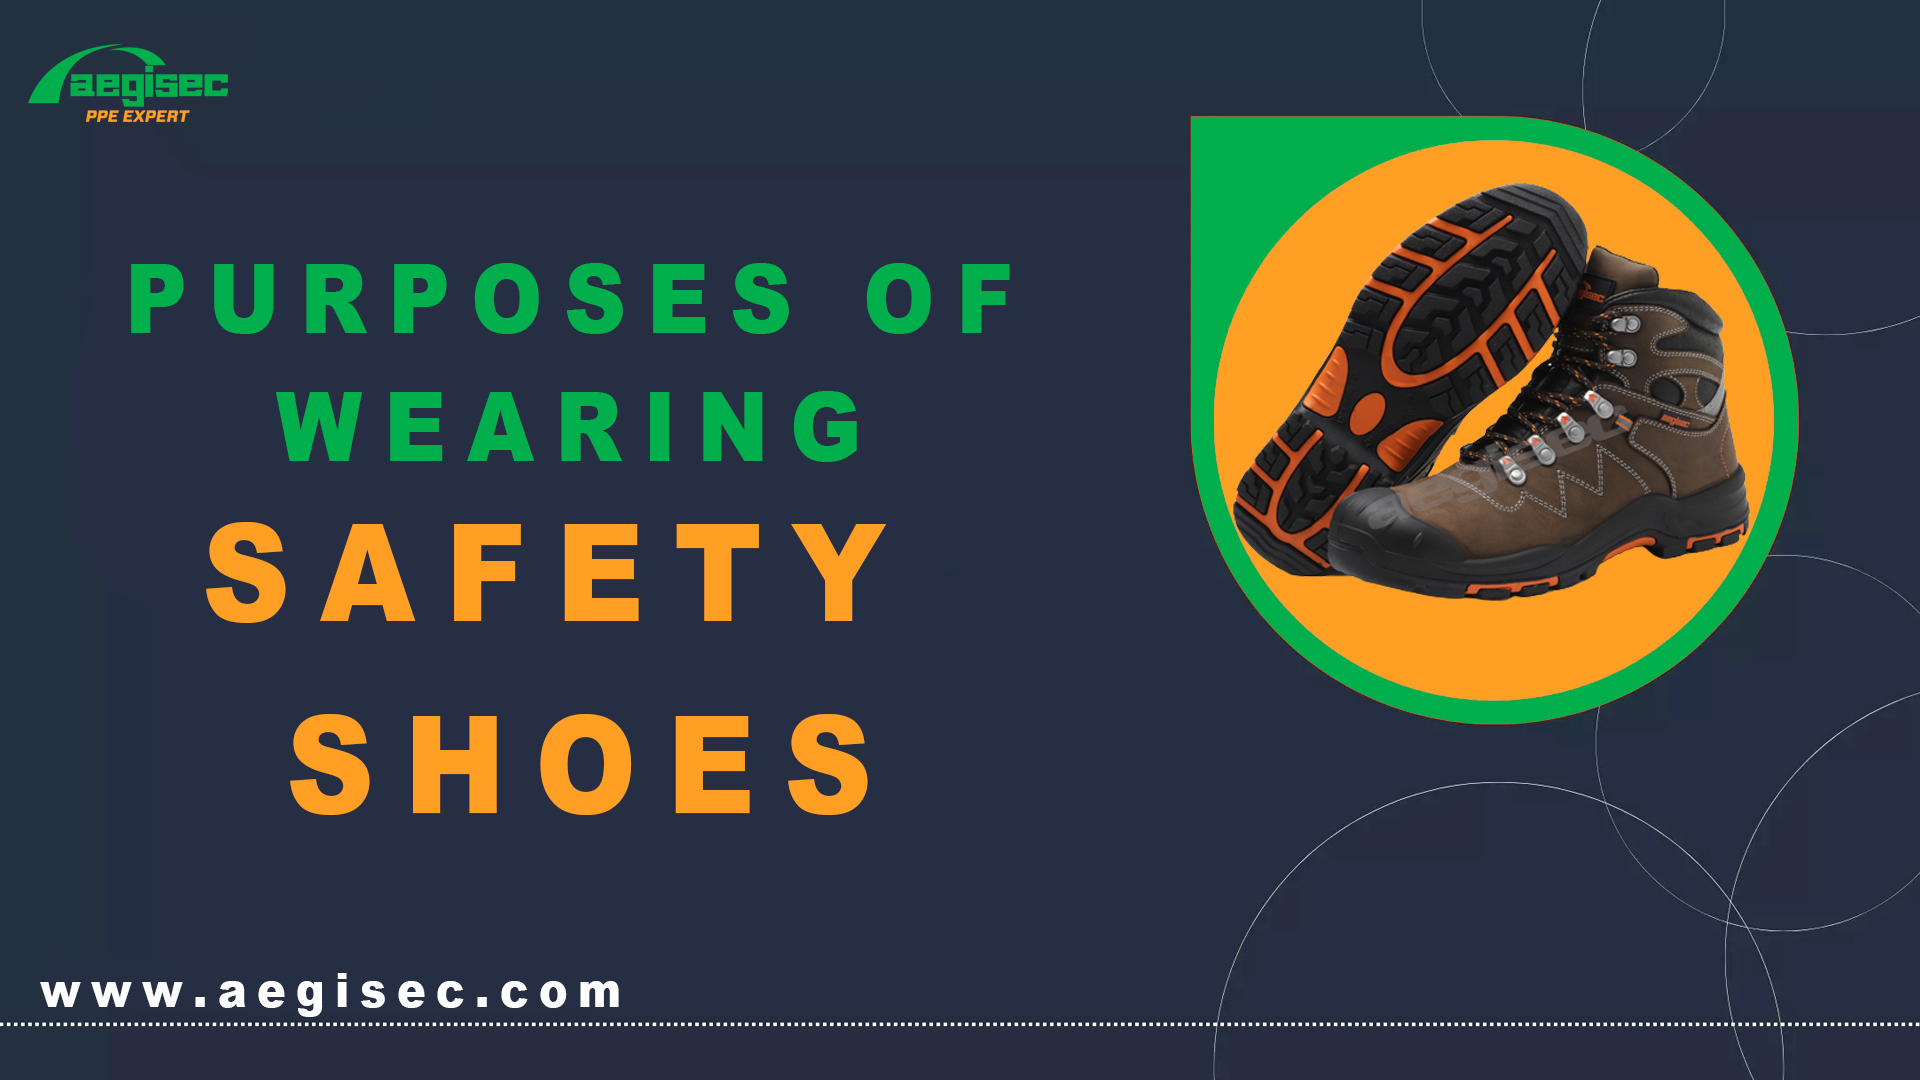 Why Do You Need To Wear Safety Shoes